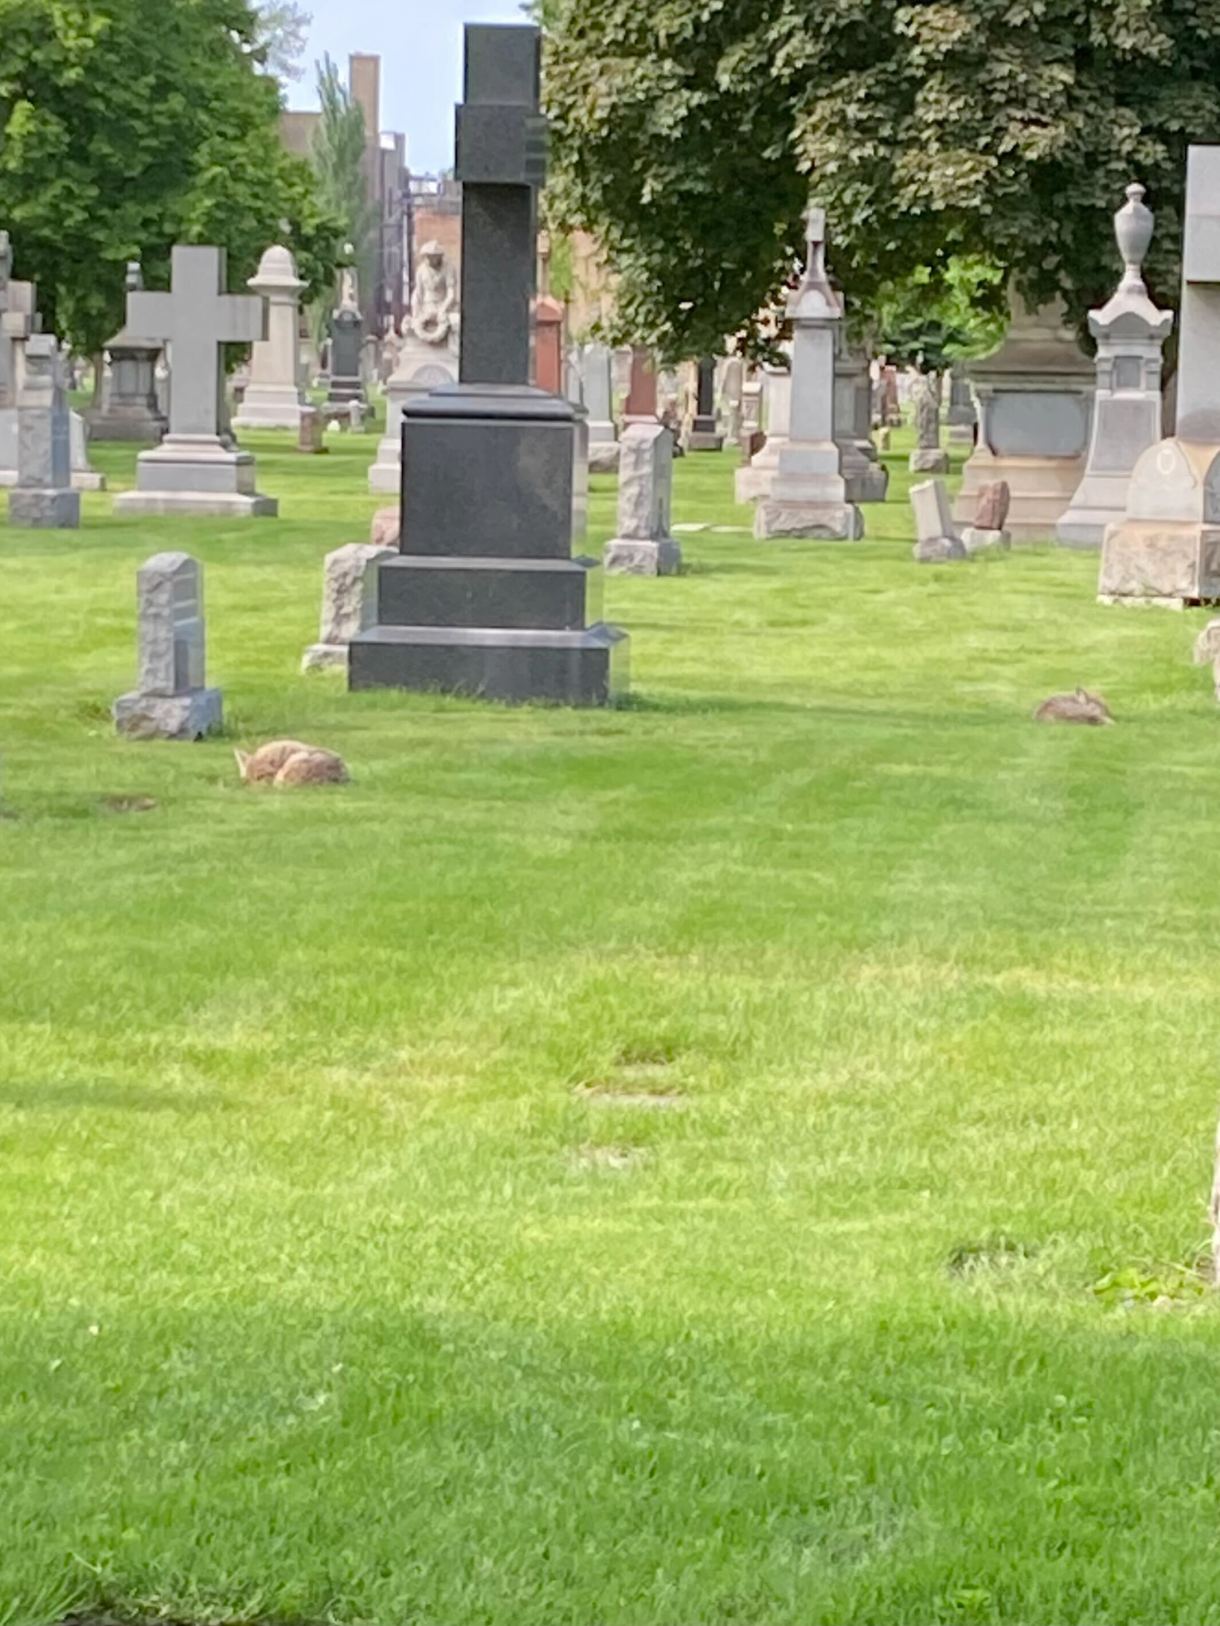 two coyotes sleep on the lawn in a cemetery